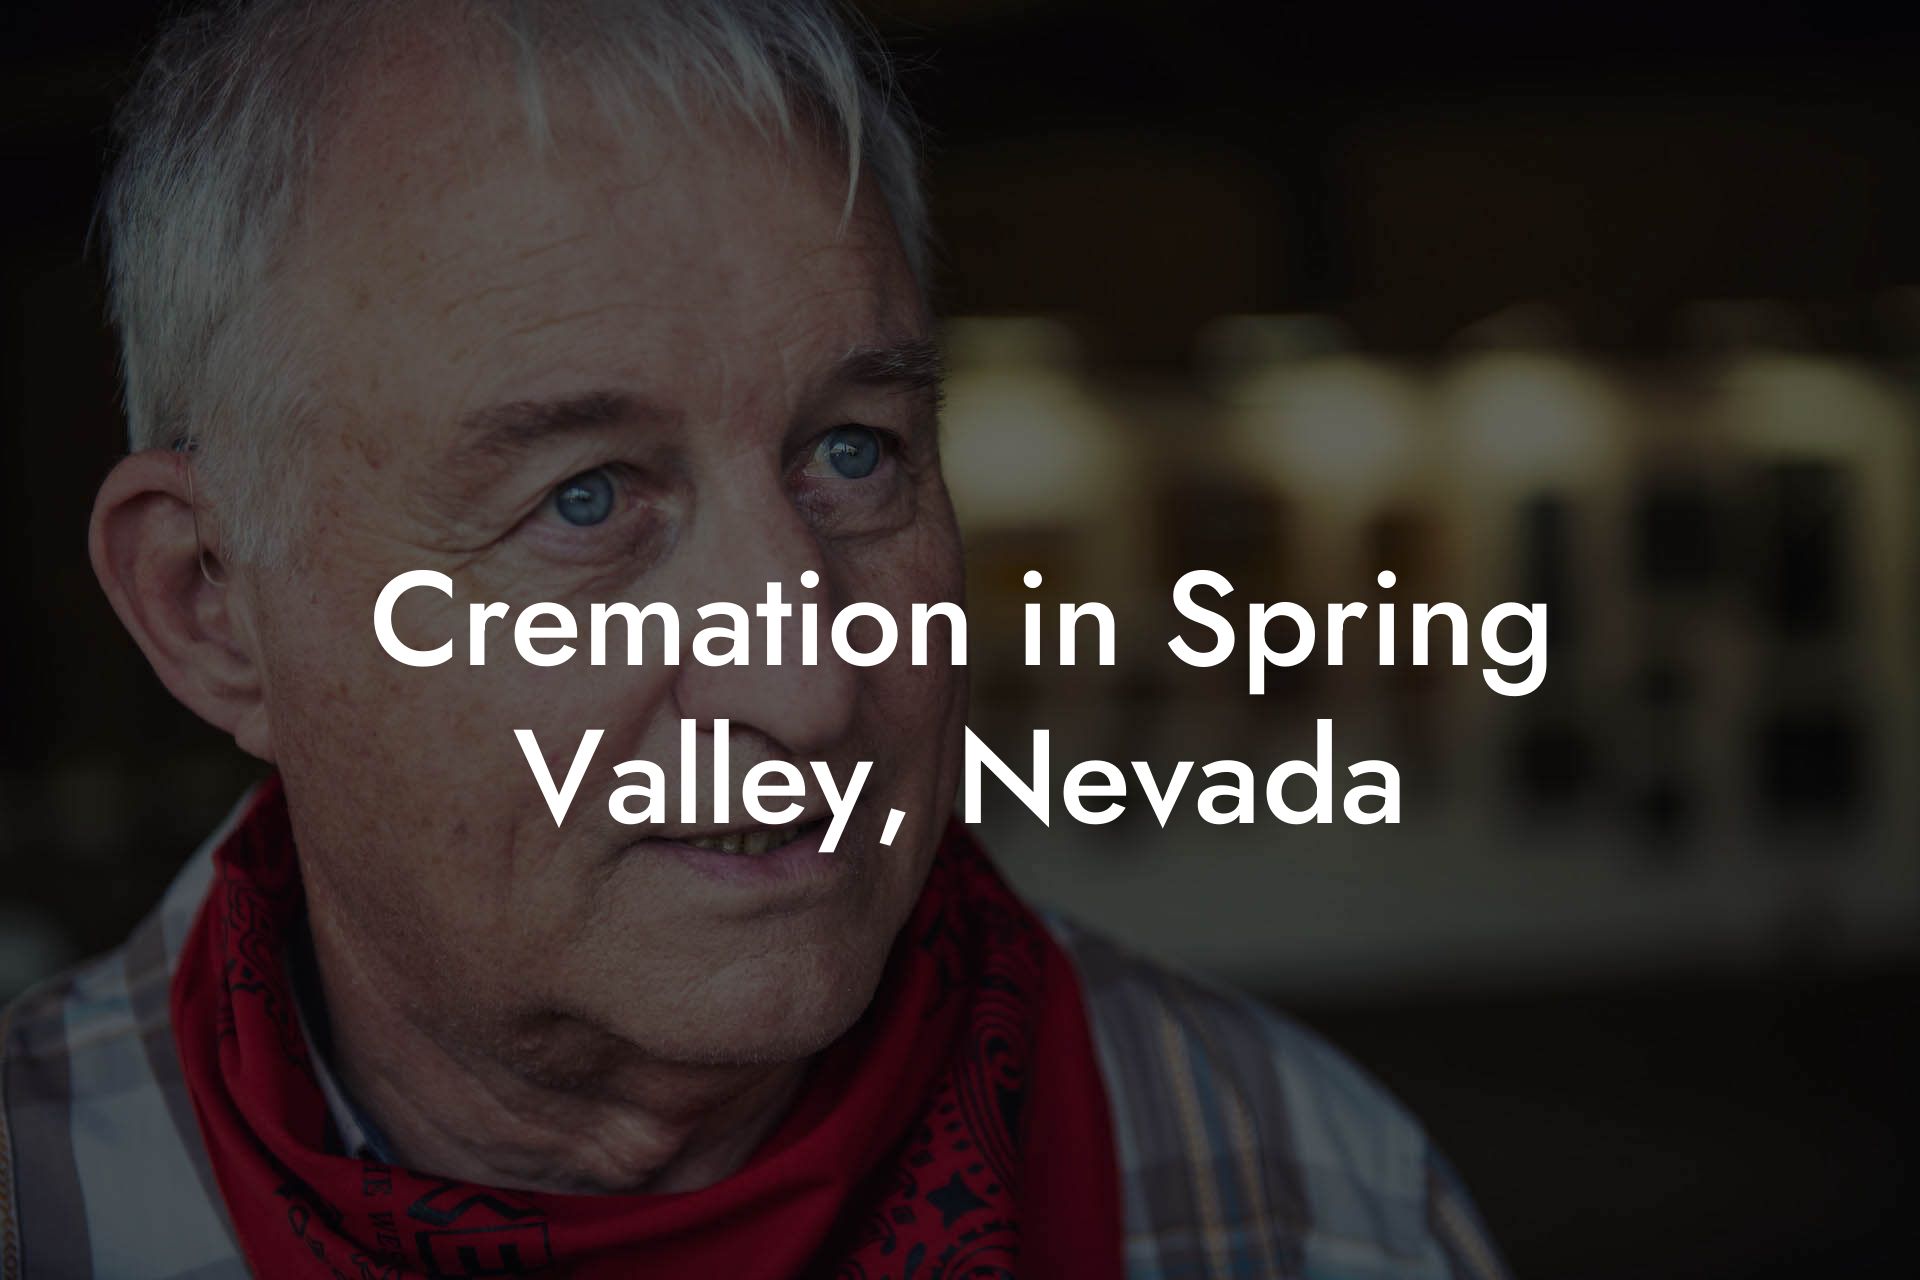 Cremation in Spring Valley, Nevada